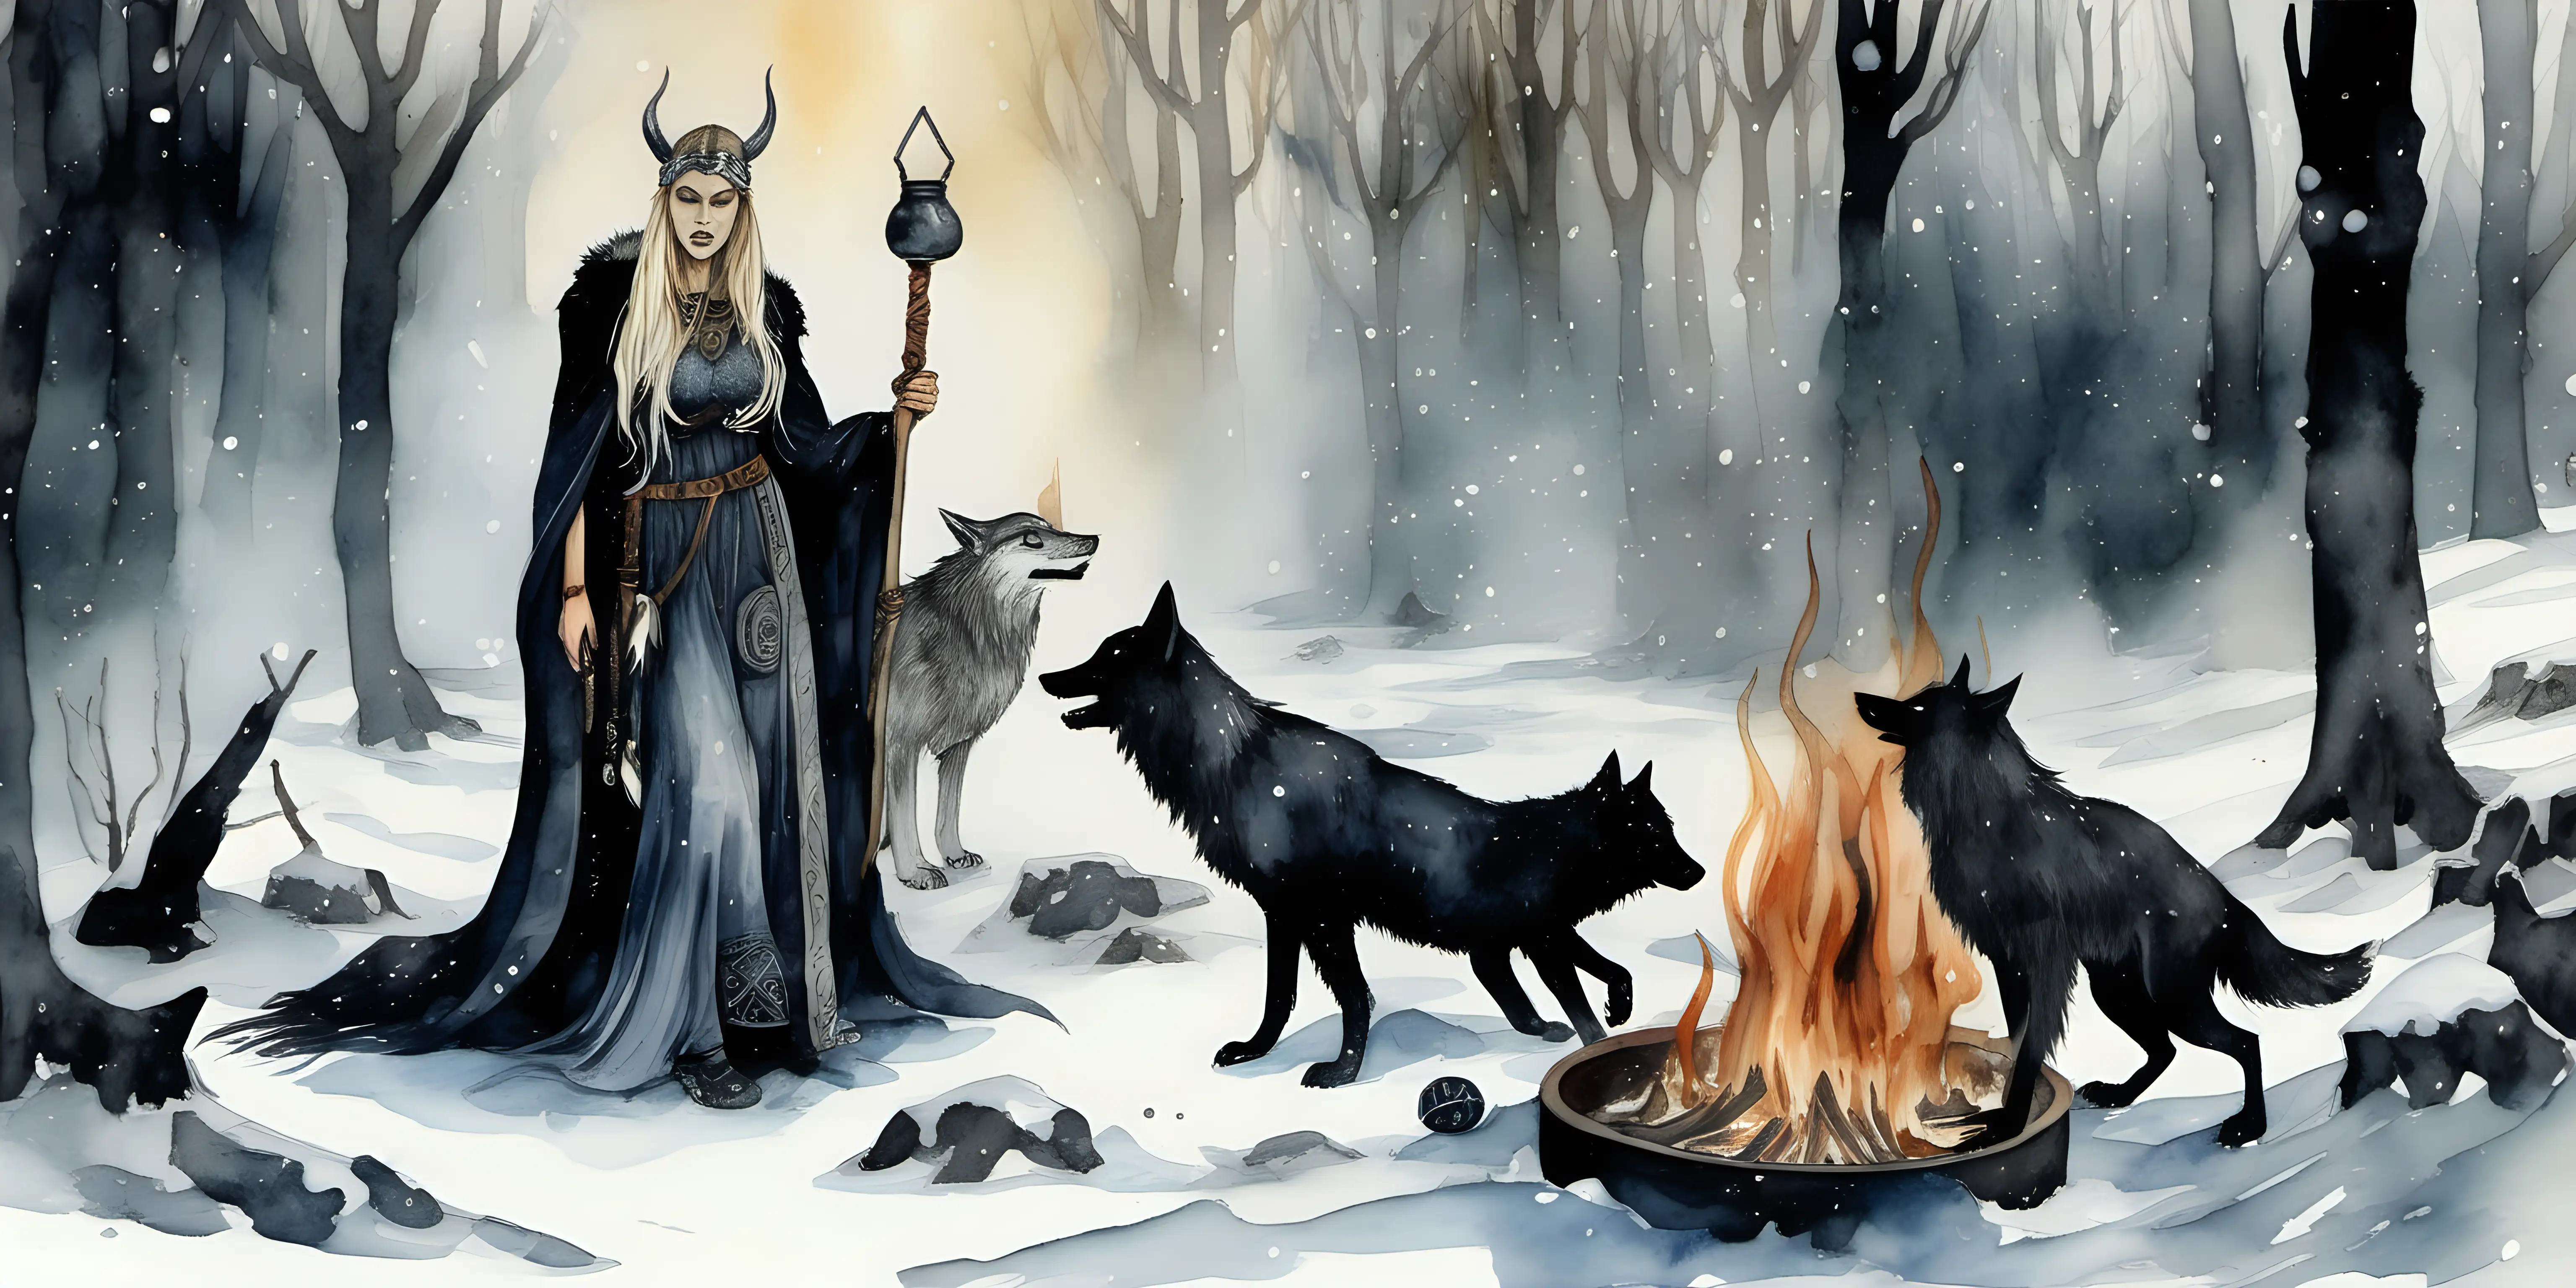 Viking Sorceress Watercolor Painting with Silver Wolves in Ancient Forest